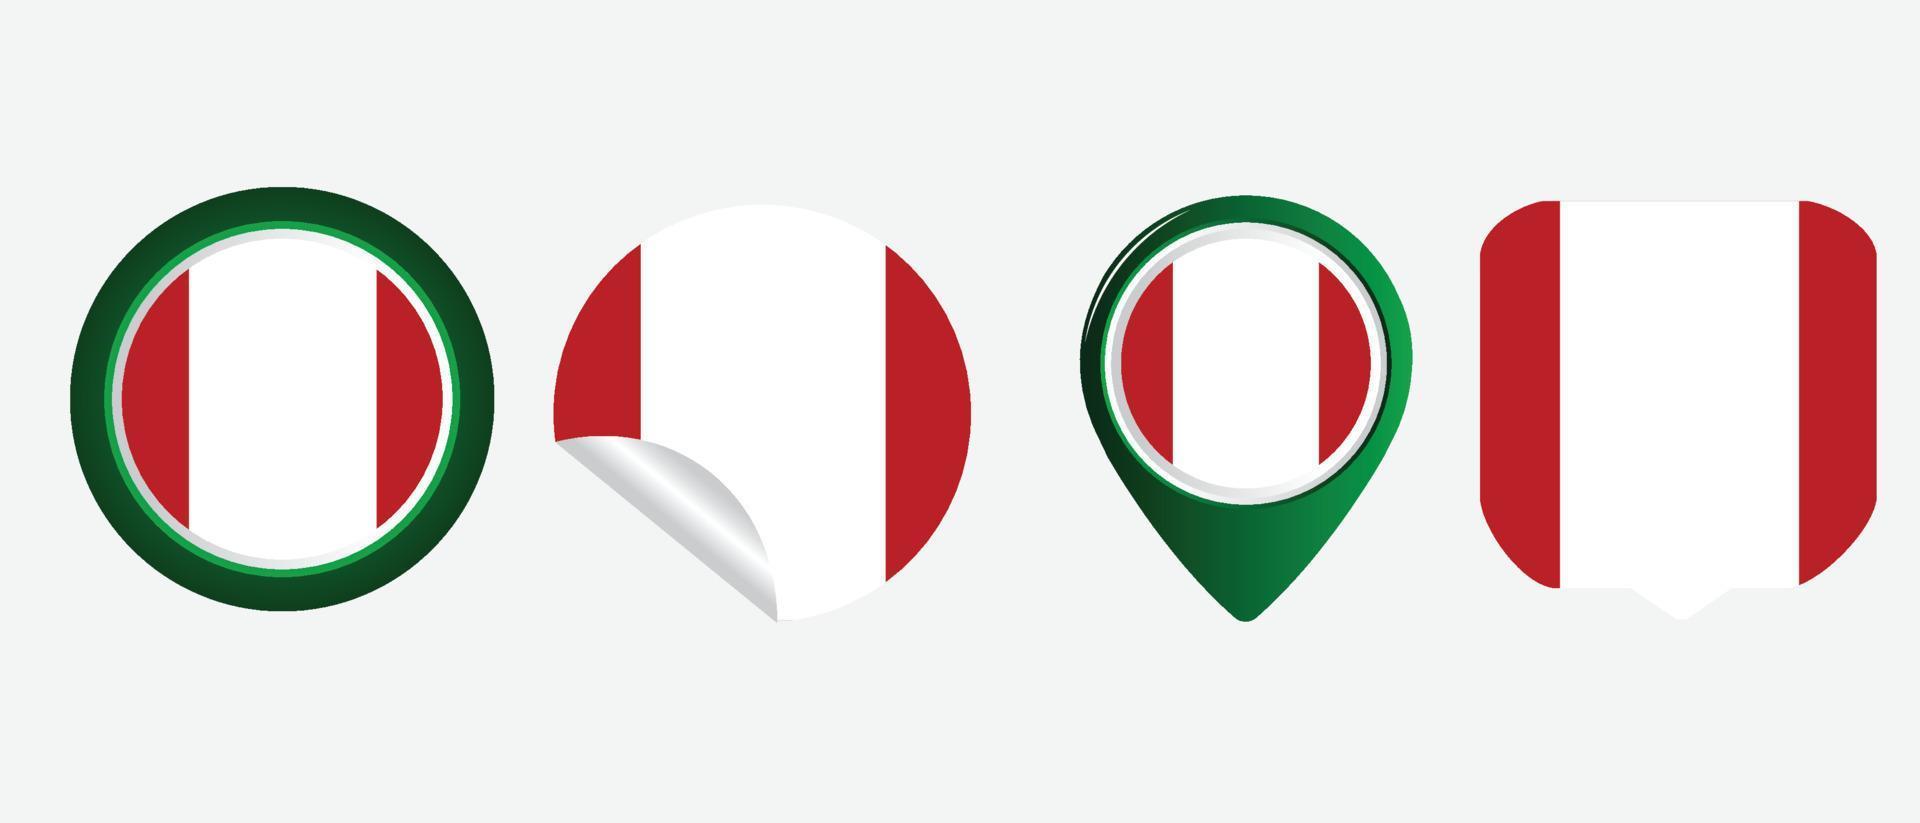 Peru flag icon . web icon set . icons collection flat. Simple vector illustration.